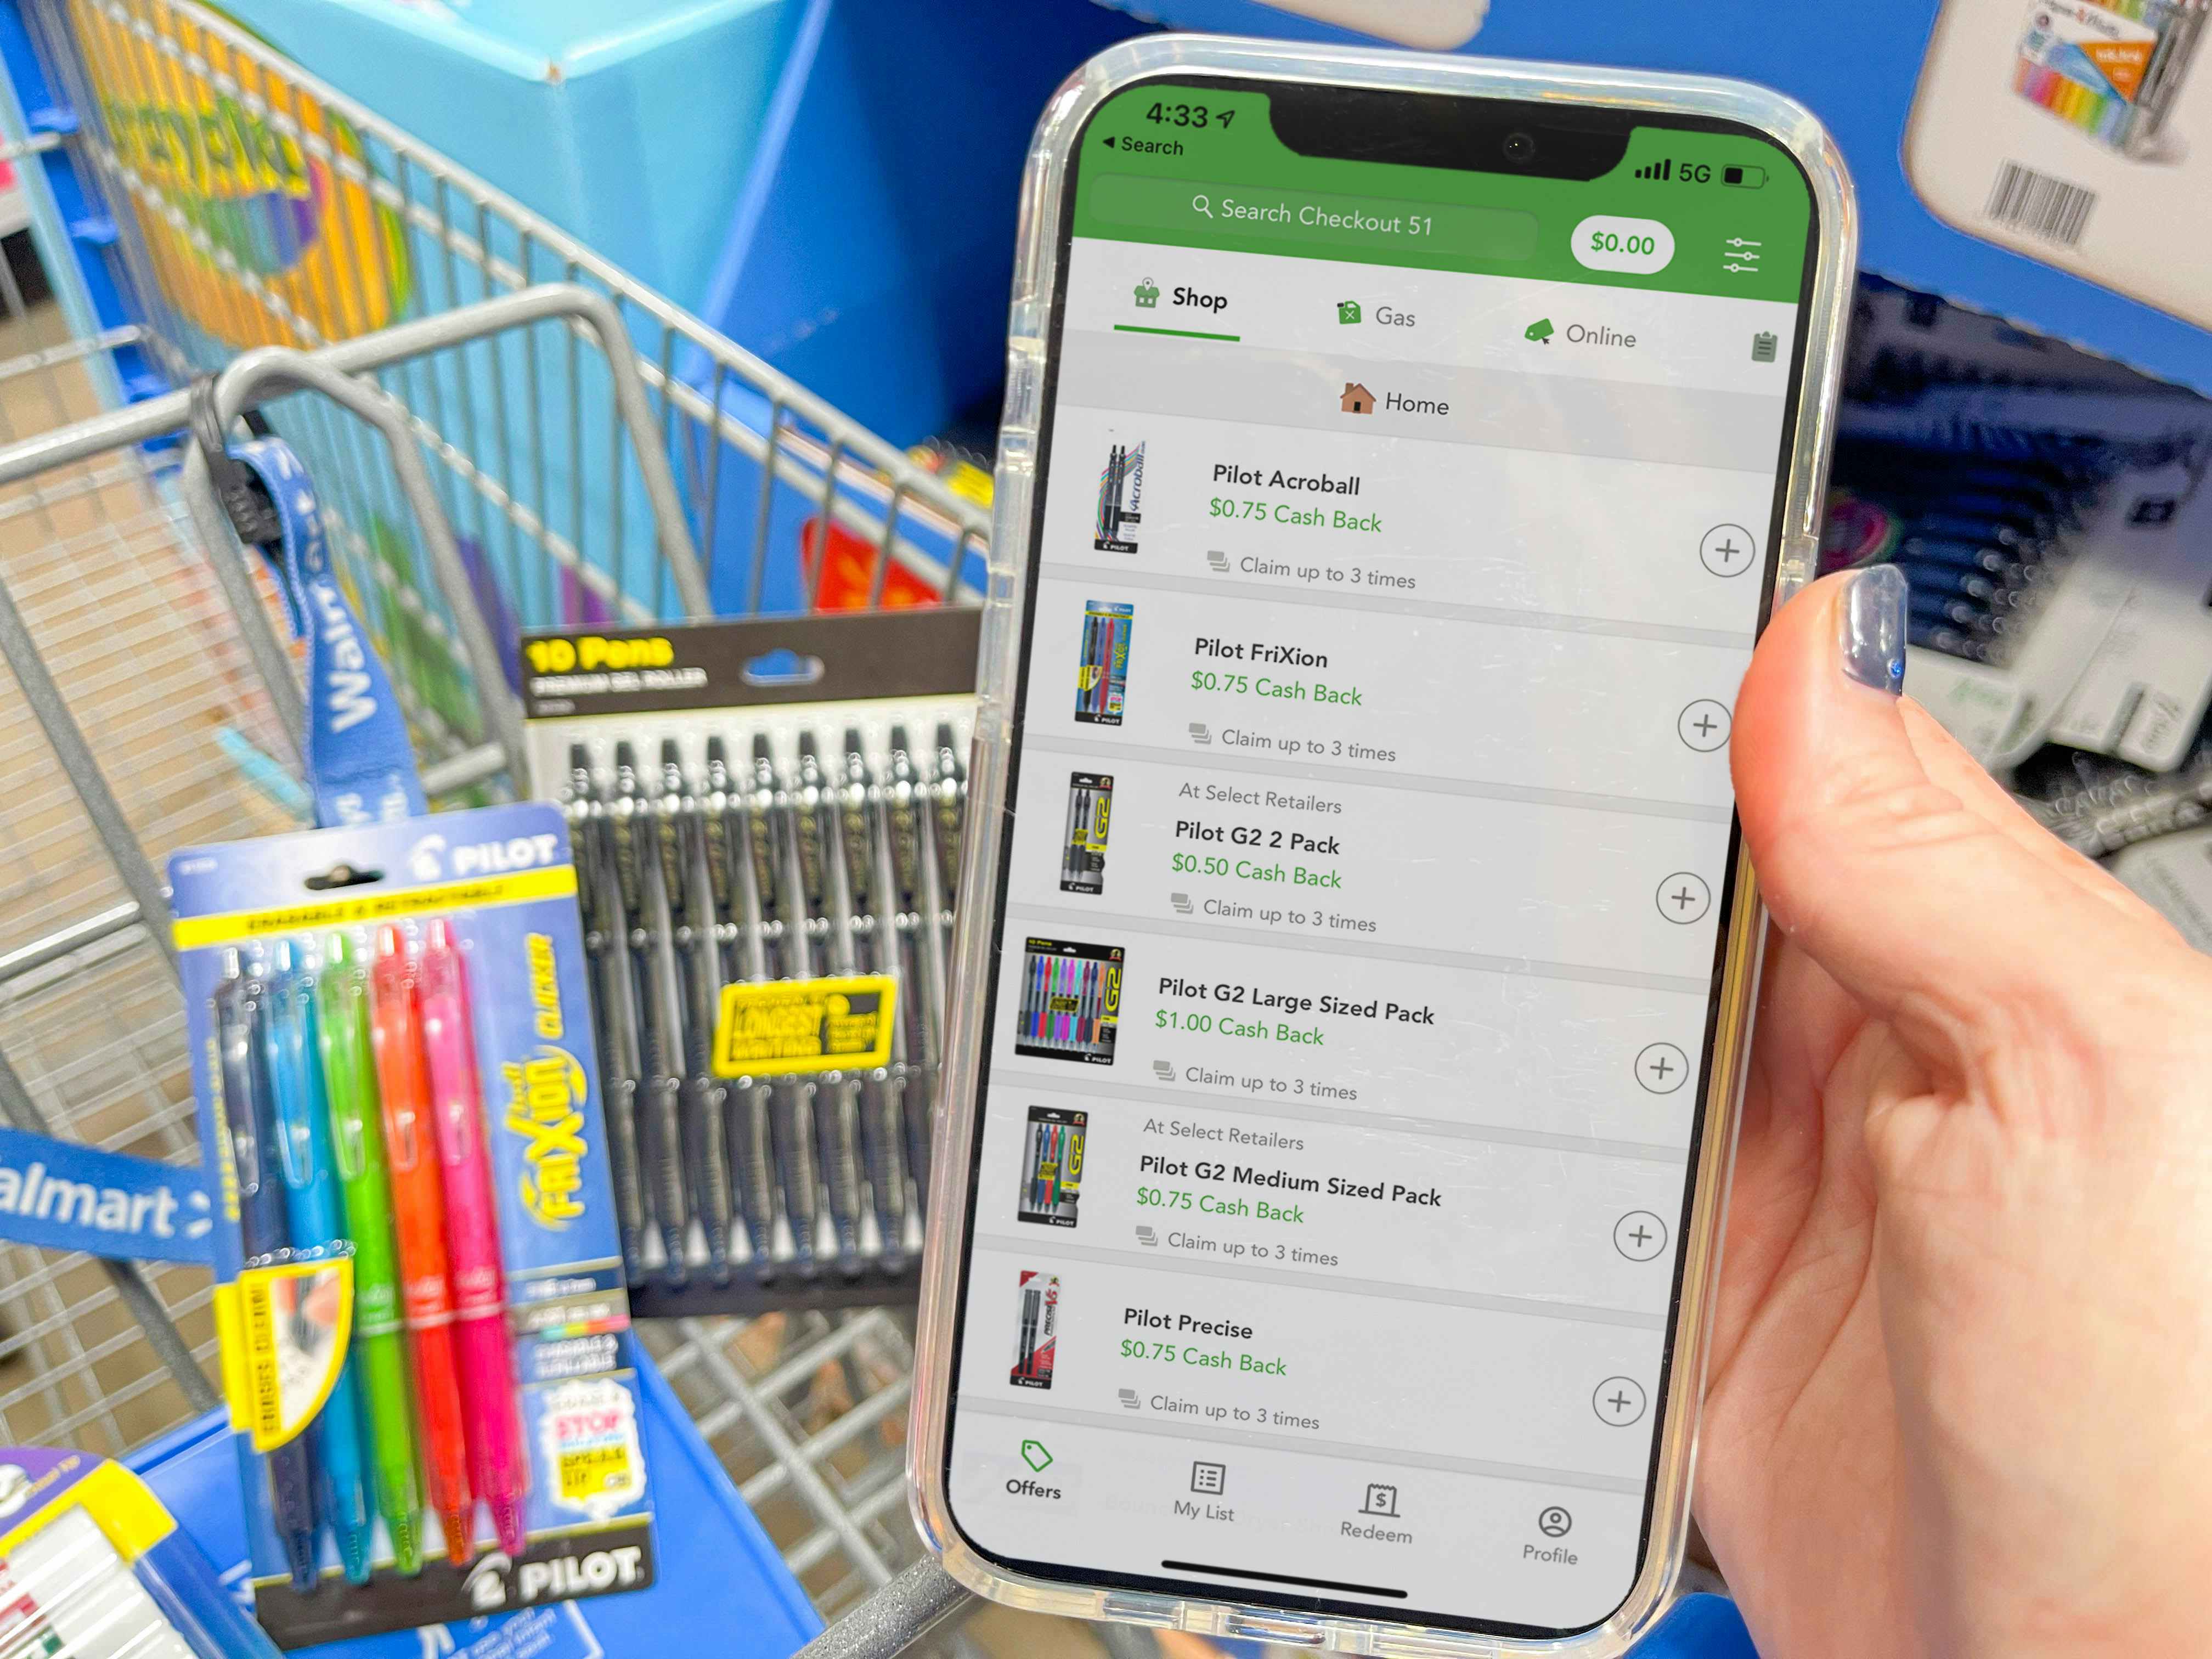 cellphone with checkout 51 app held up in front pens in cart